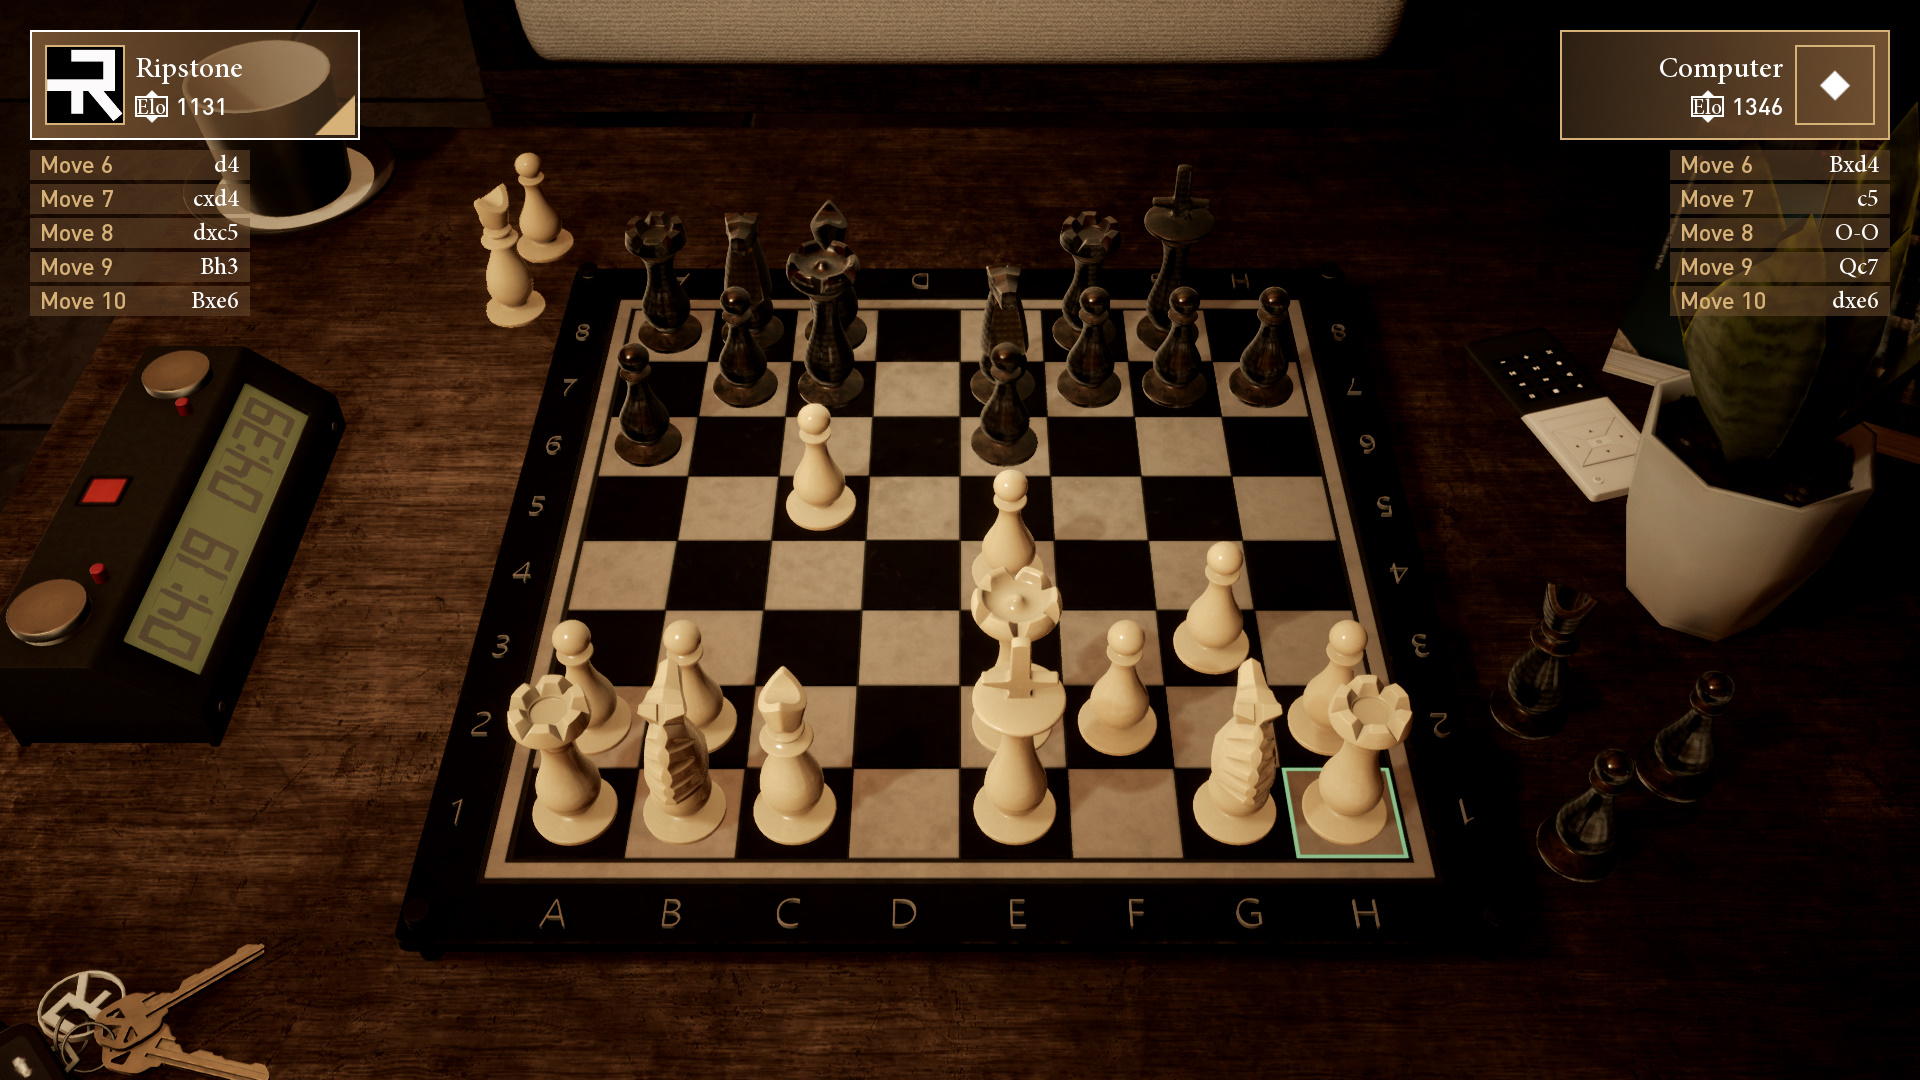 Chess Ultra system requirements